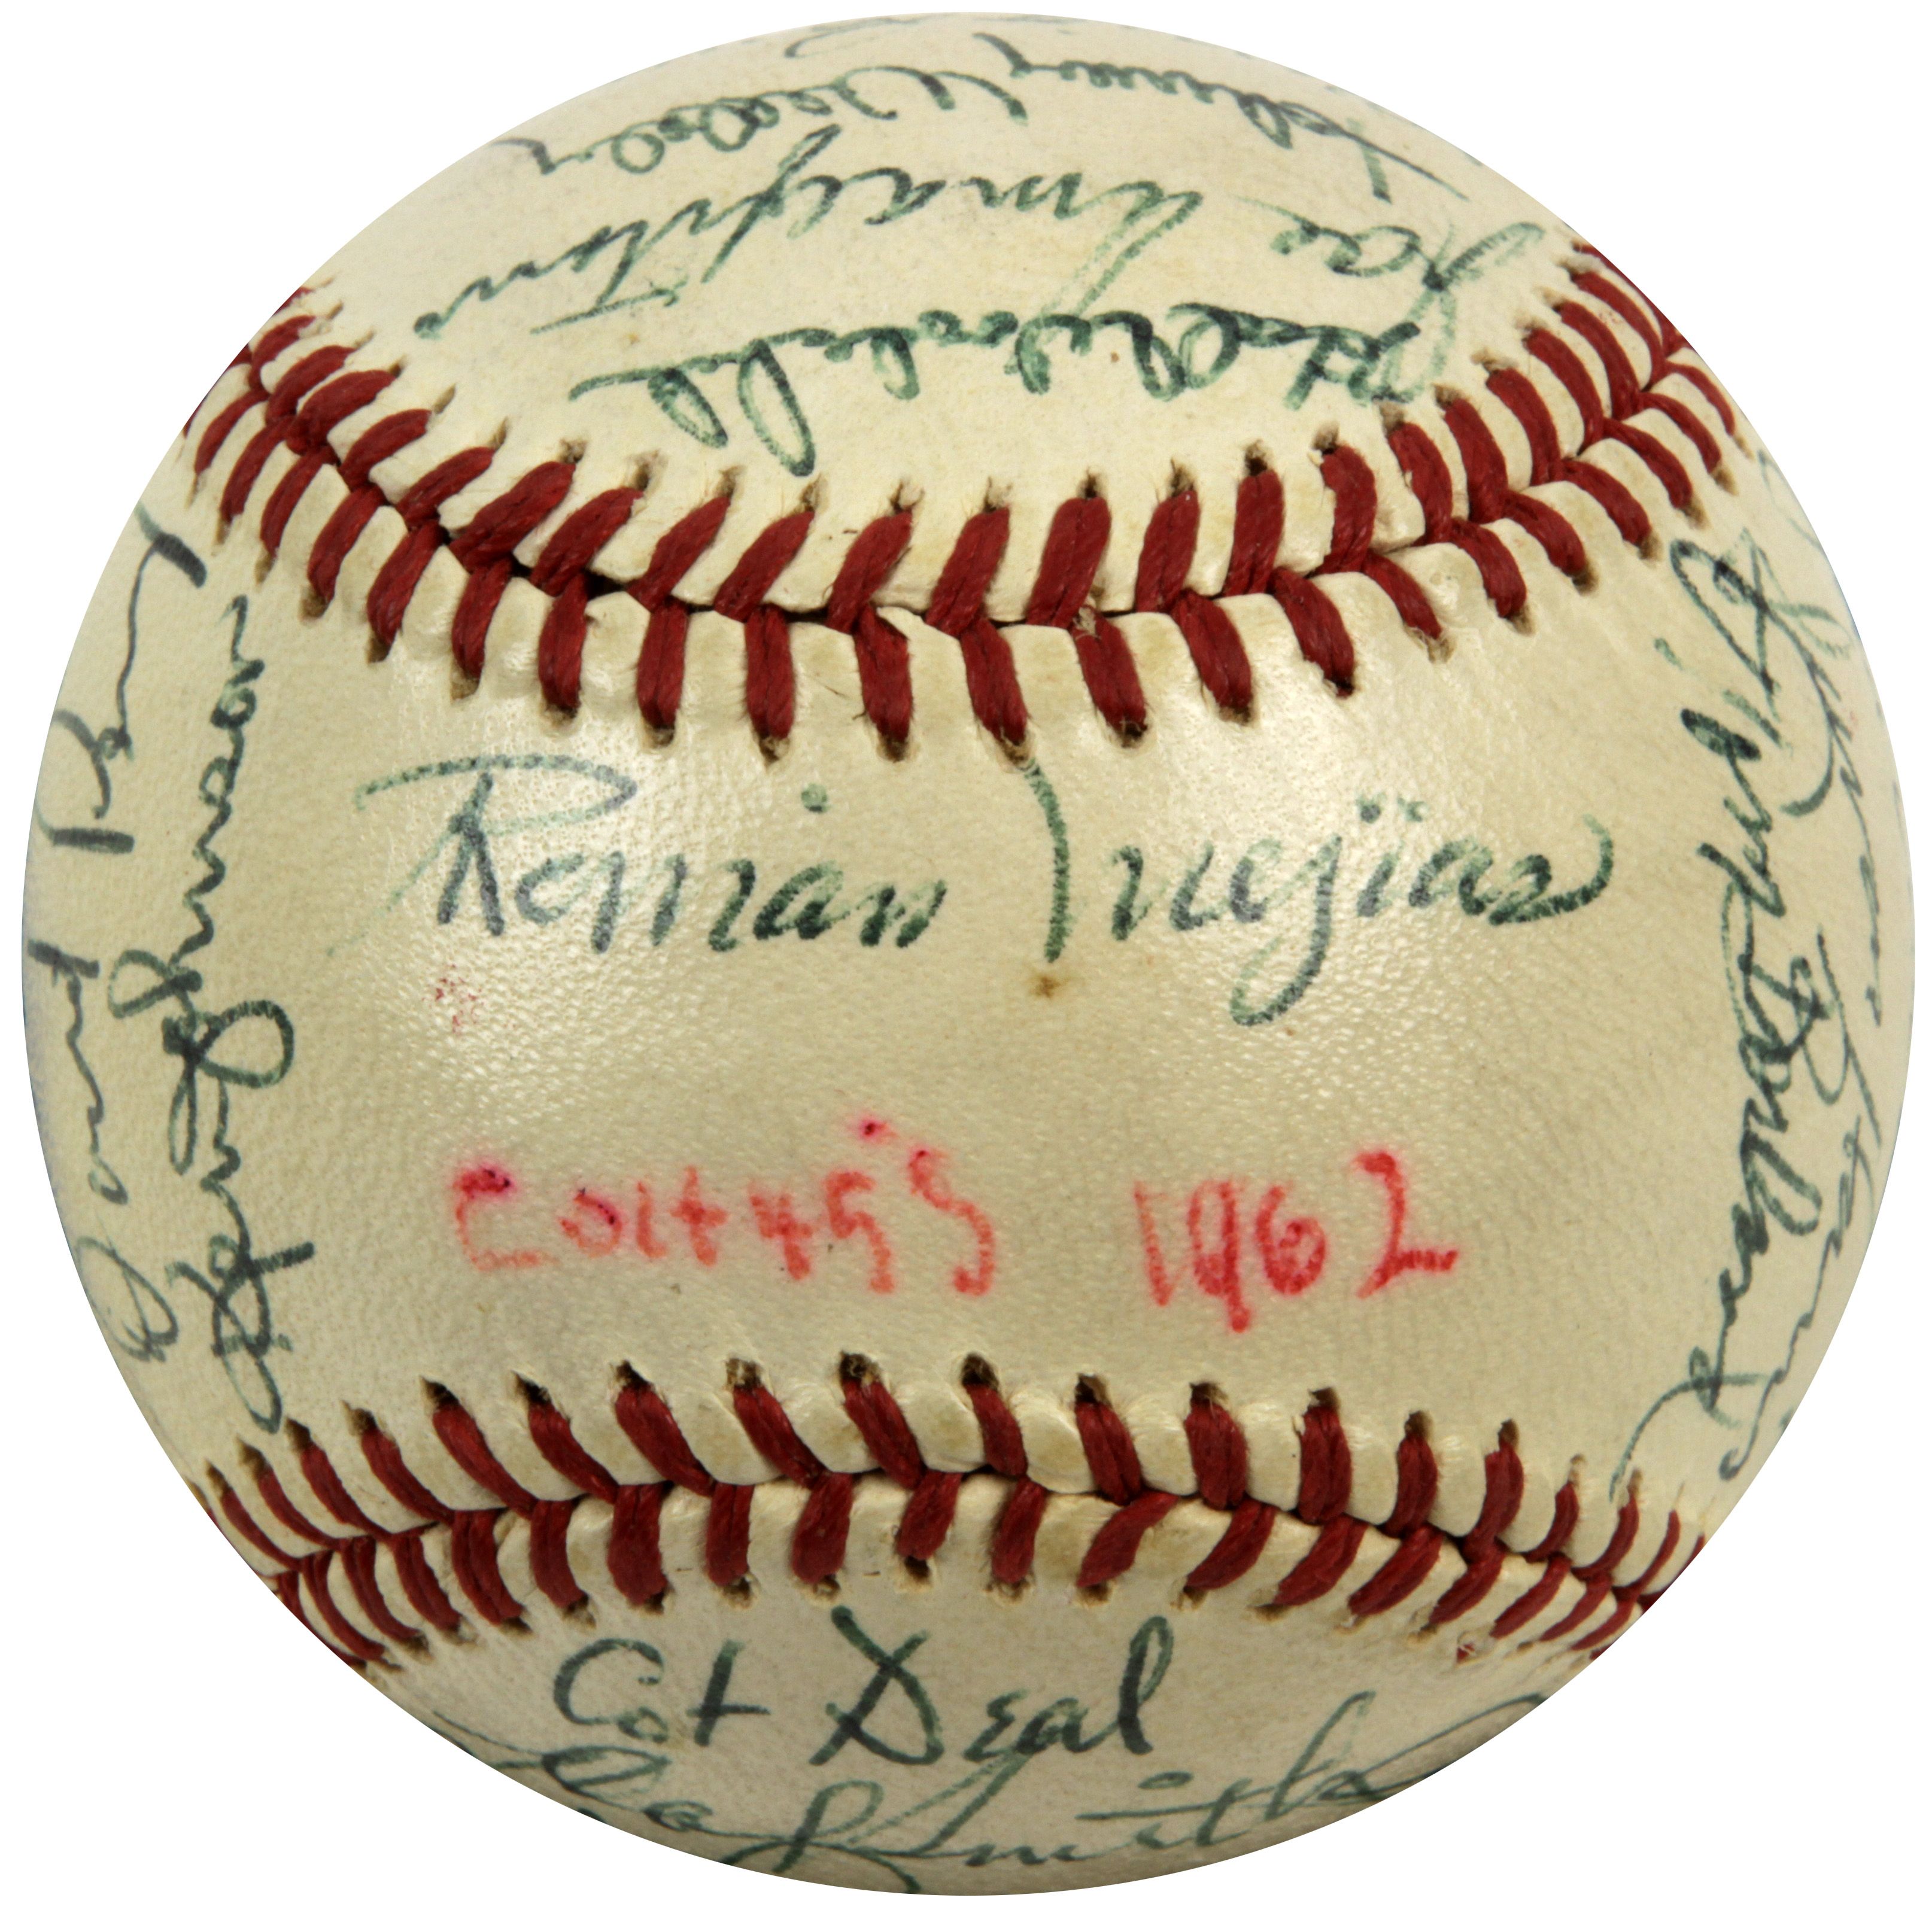 Today In 1964: The Houston Colt .45s - Baseball by BSmile